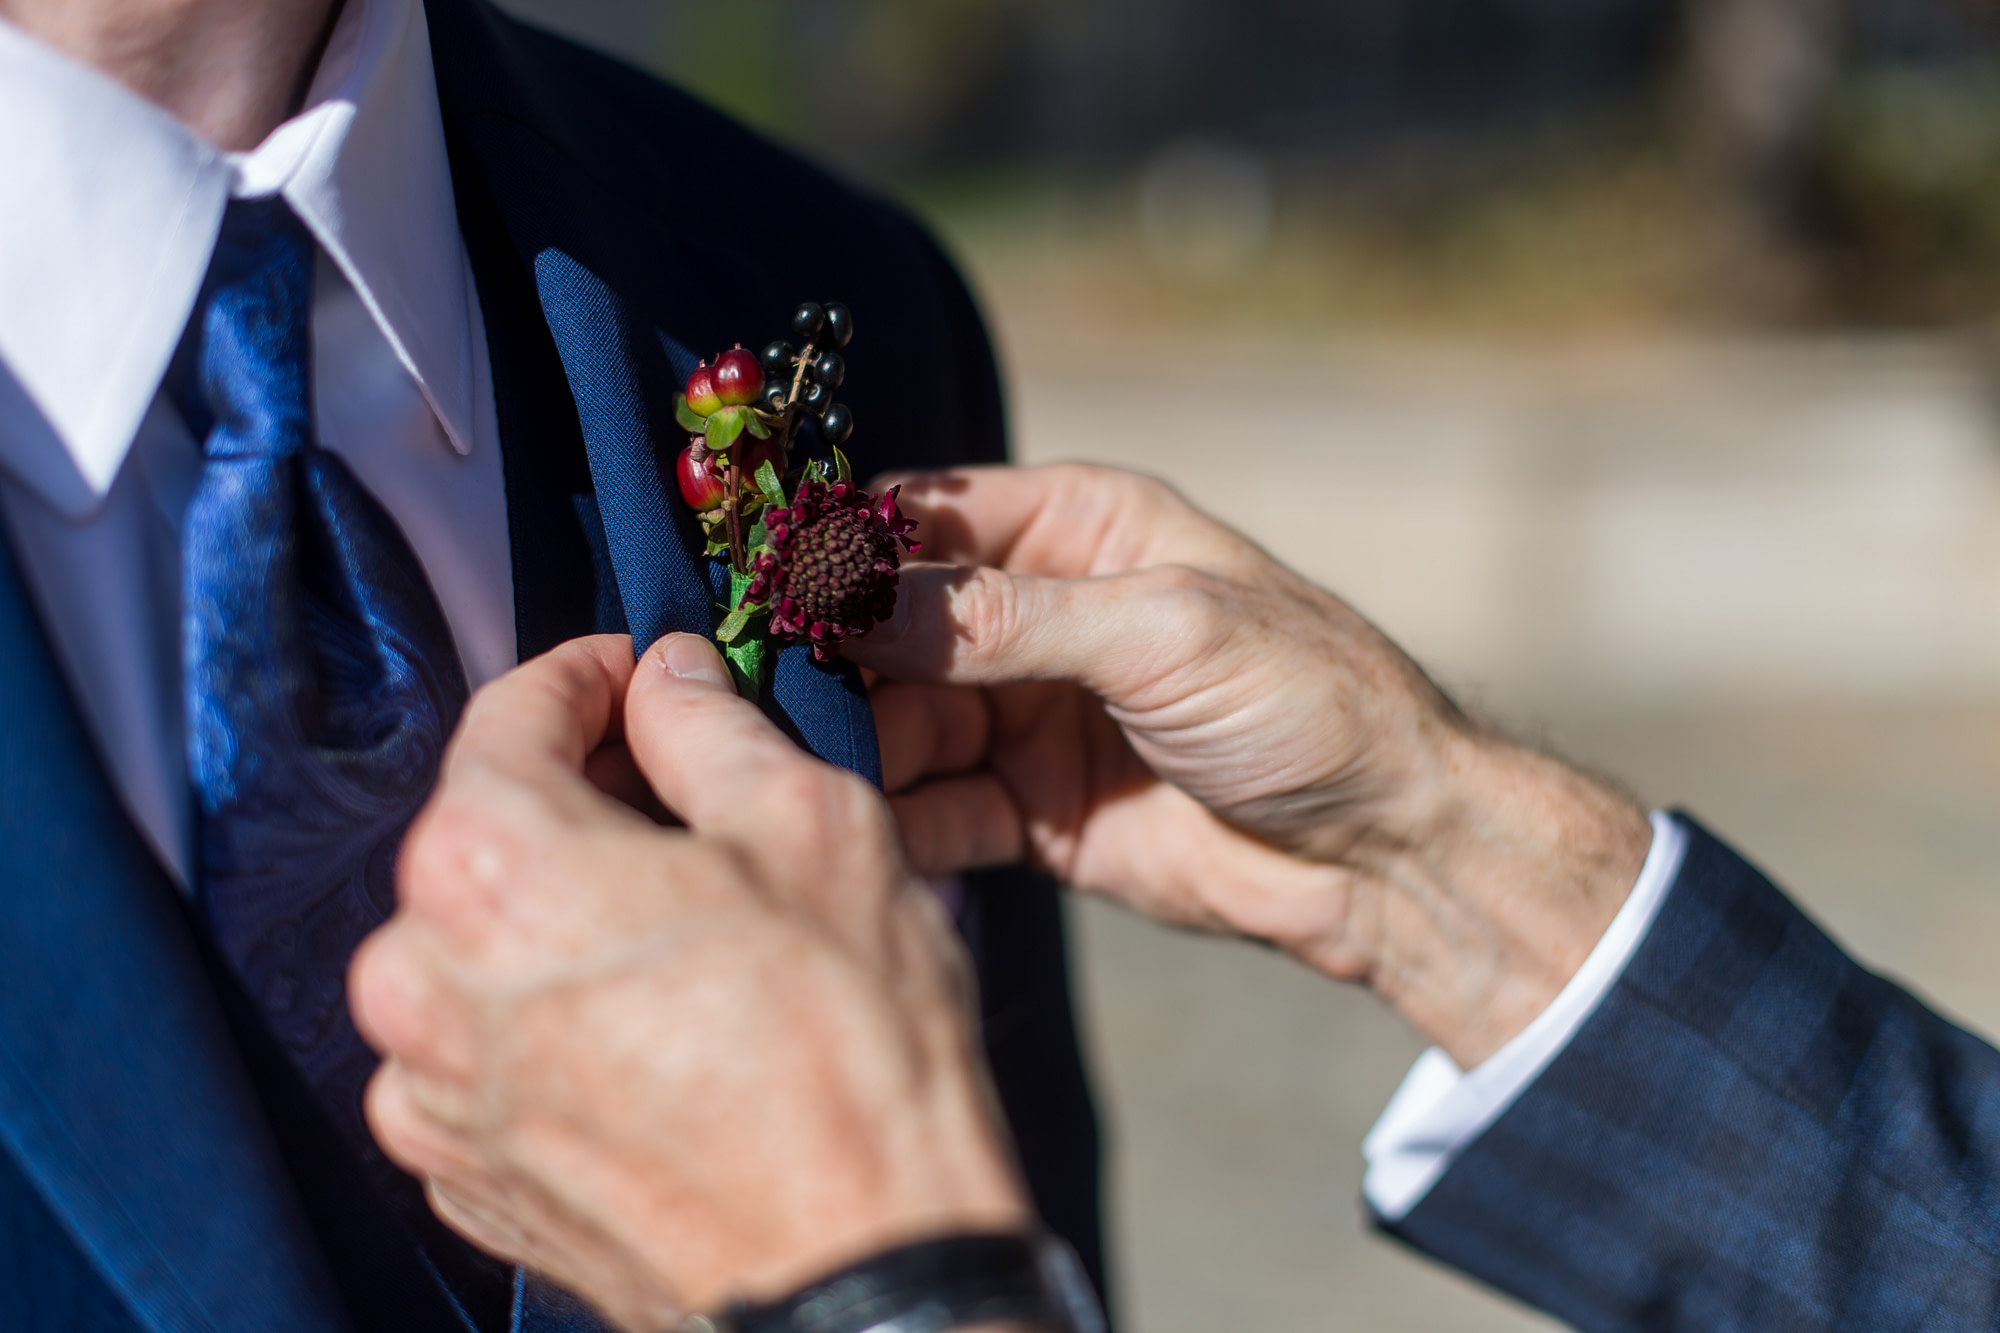 The groom's boutonnière is secured before his Cathedral Basilica of the Immaculate Conception wedding in Denver, Colorado.